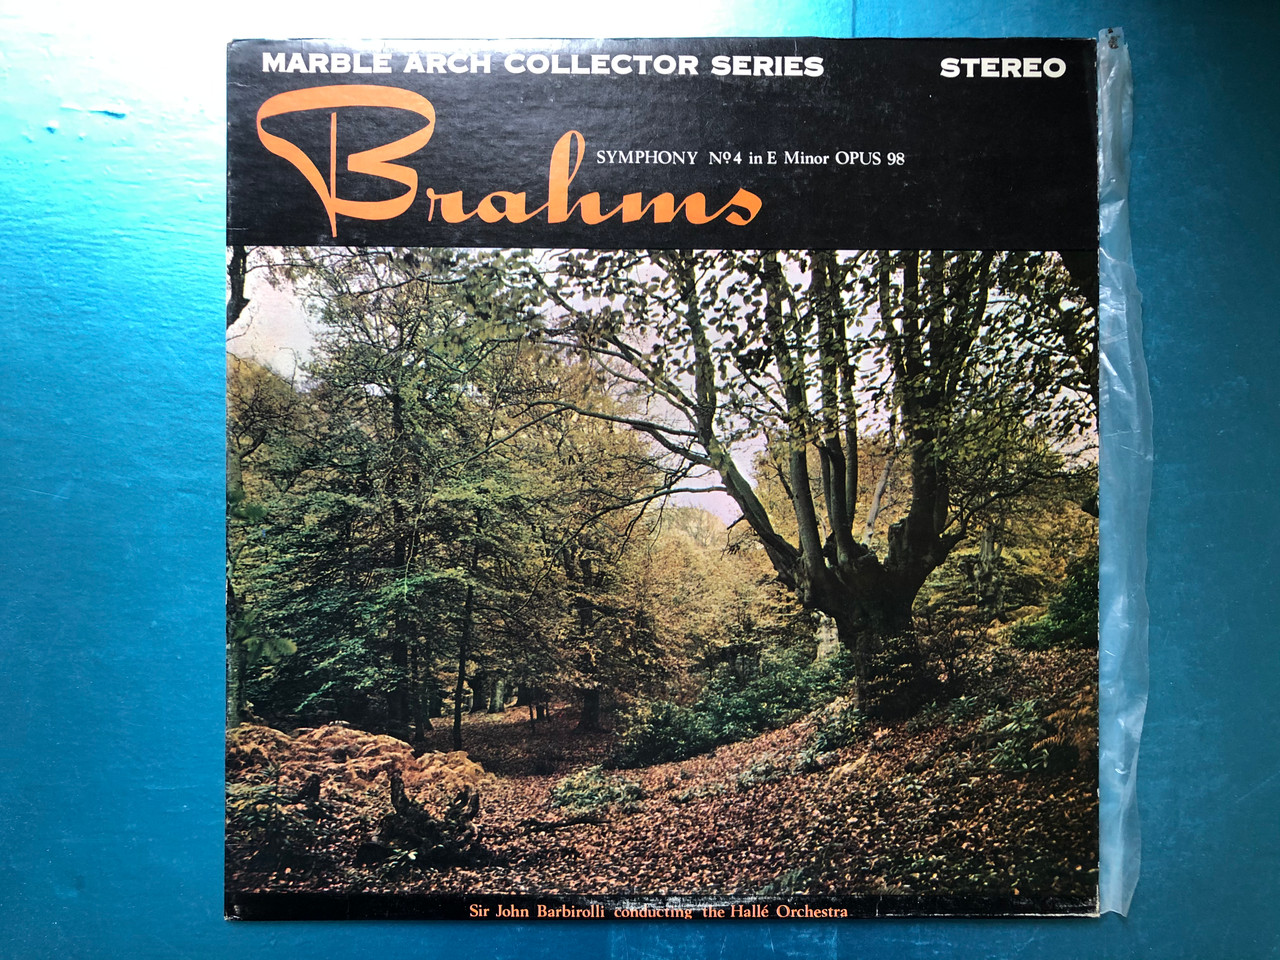 https://cdn10.bigcommerce.com/s-62bdpkt7pb/products/30644/images/181091/Brahms_-_Symphony_No._4_In_E_Minor_OPUS_98_Sir_John_Barbirolli_The_Halle_Orchestra_Marble_Arch_Collector_Series_Marble_Arch_LP_Stereo_MALS_920_1__48477.1623422733.1280.1280.JPG?c=2